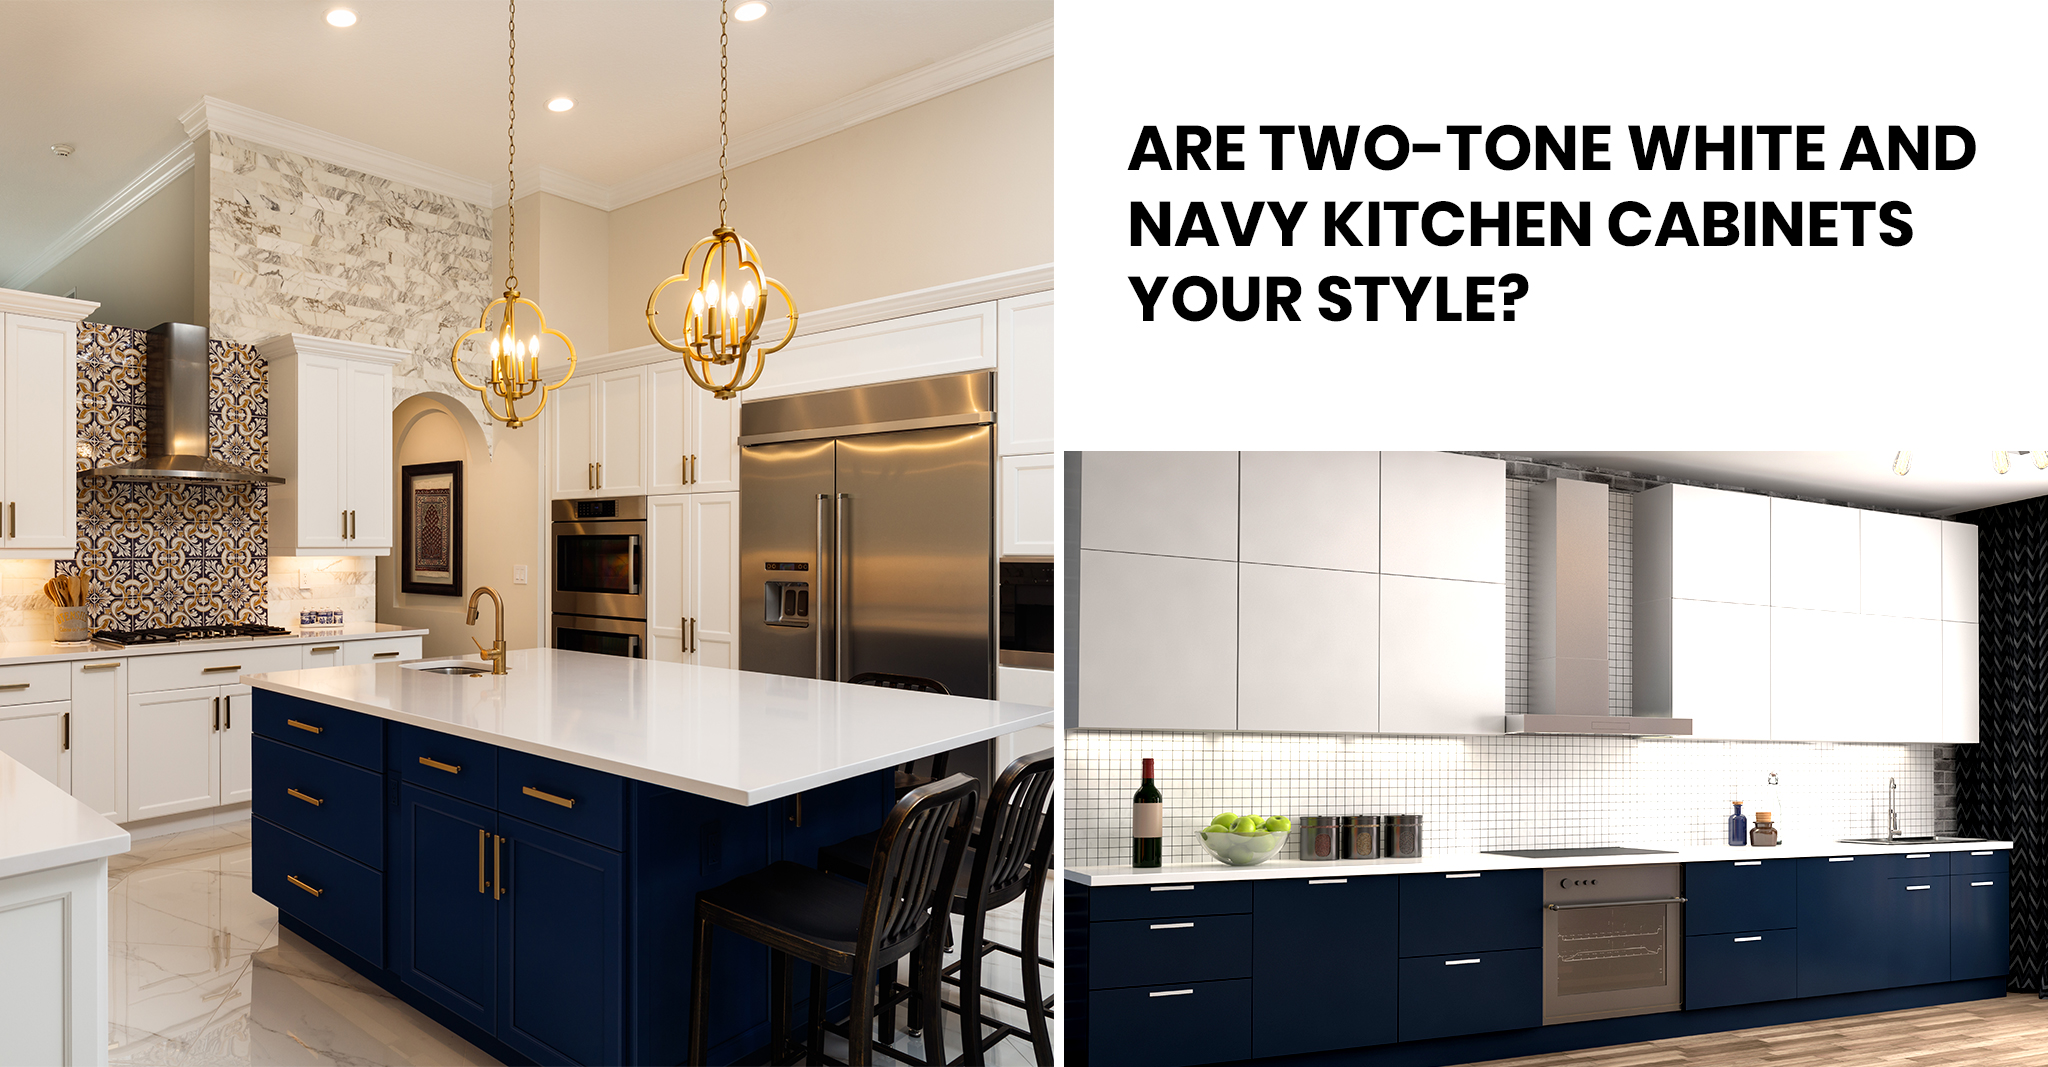 Are Two-tone White and Navy Kitchen Cabinets Your Style?